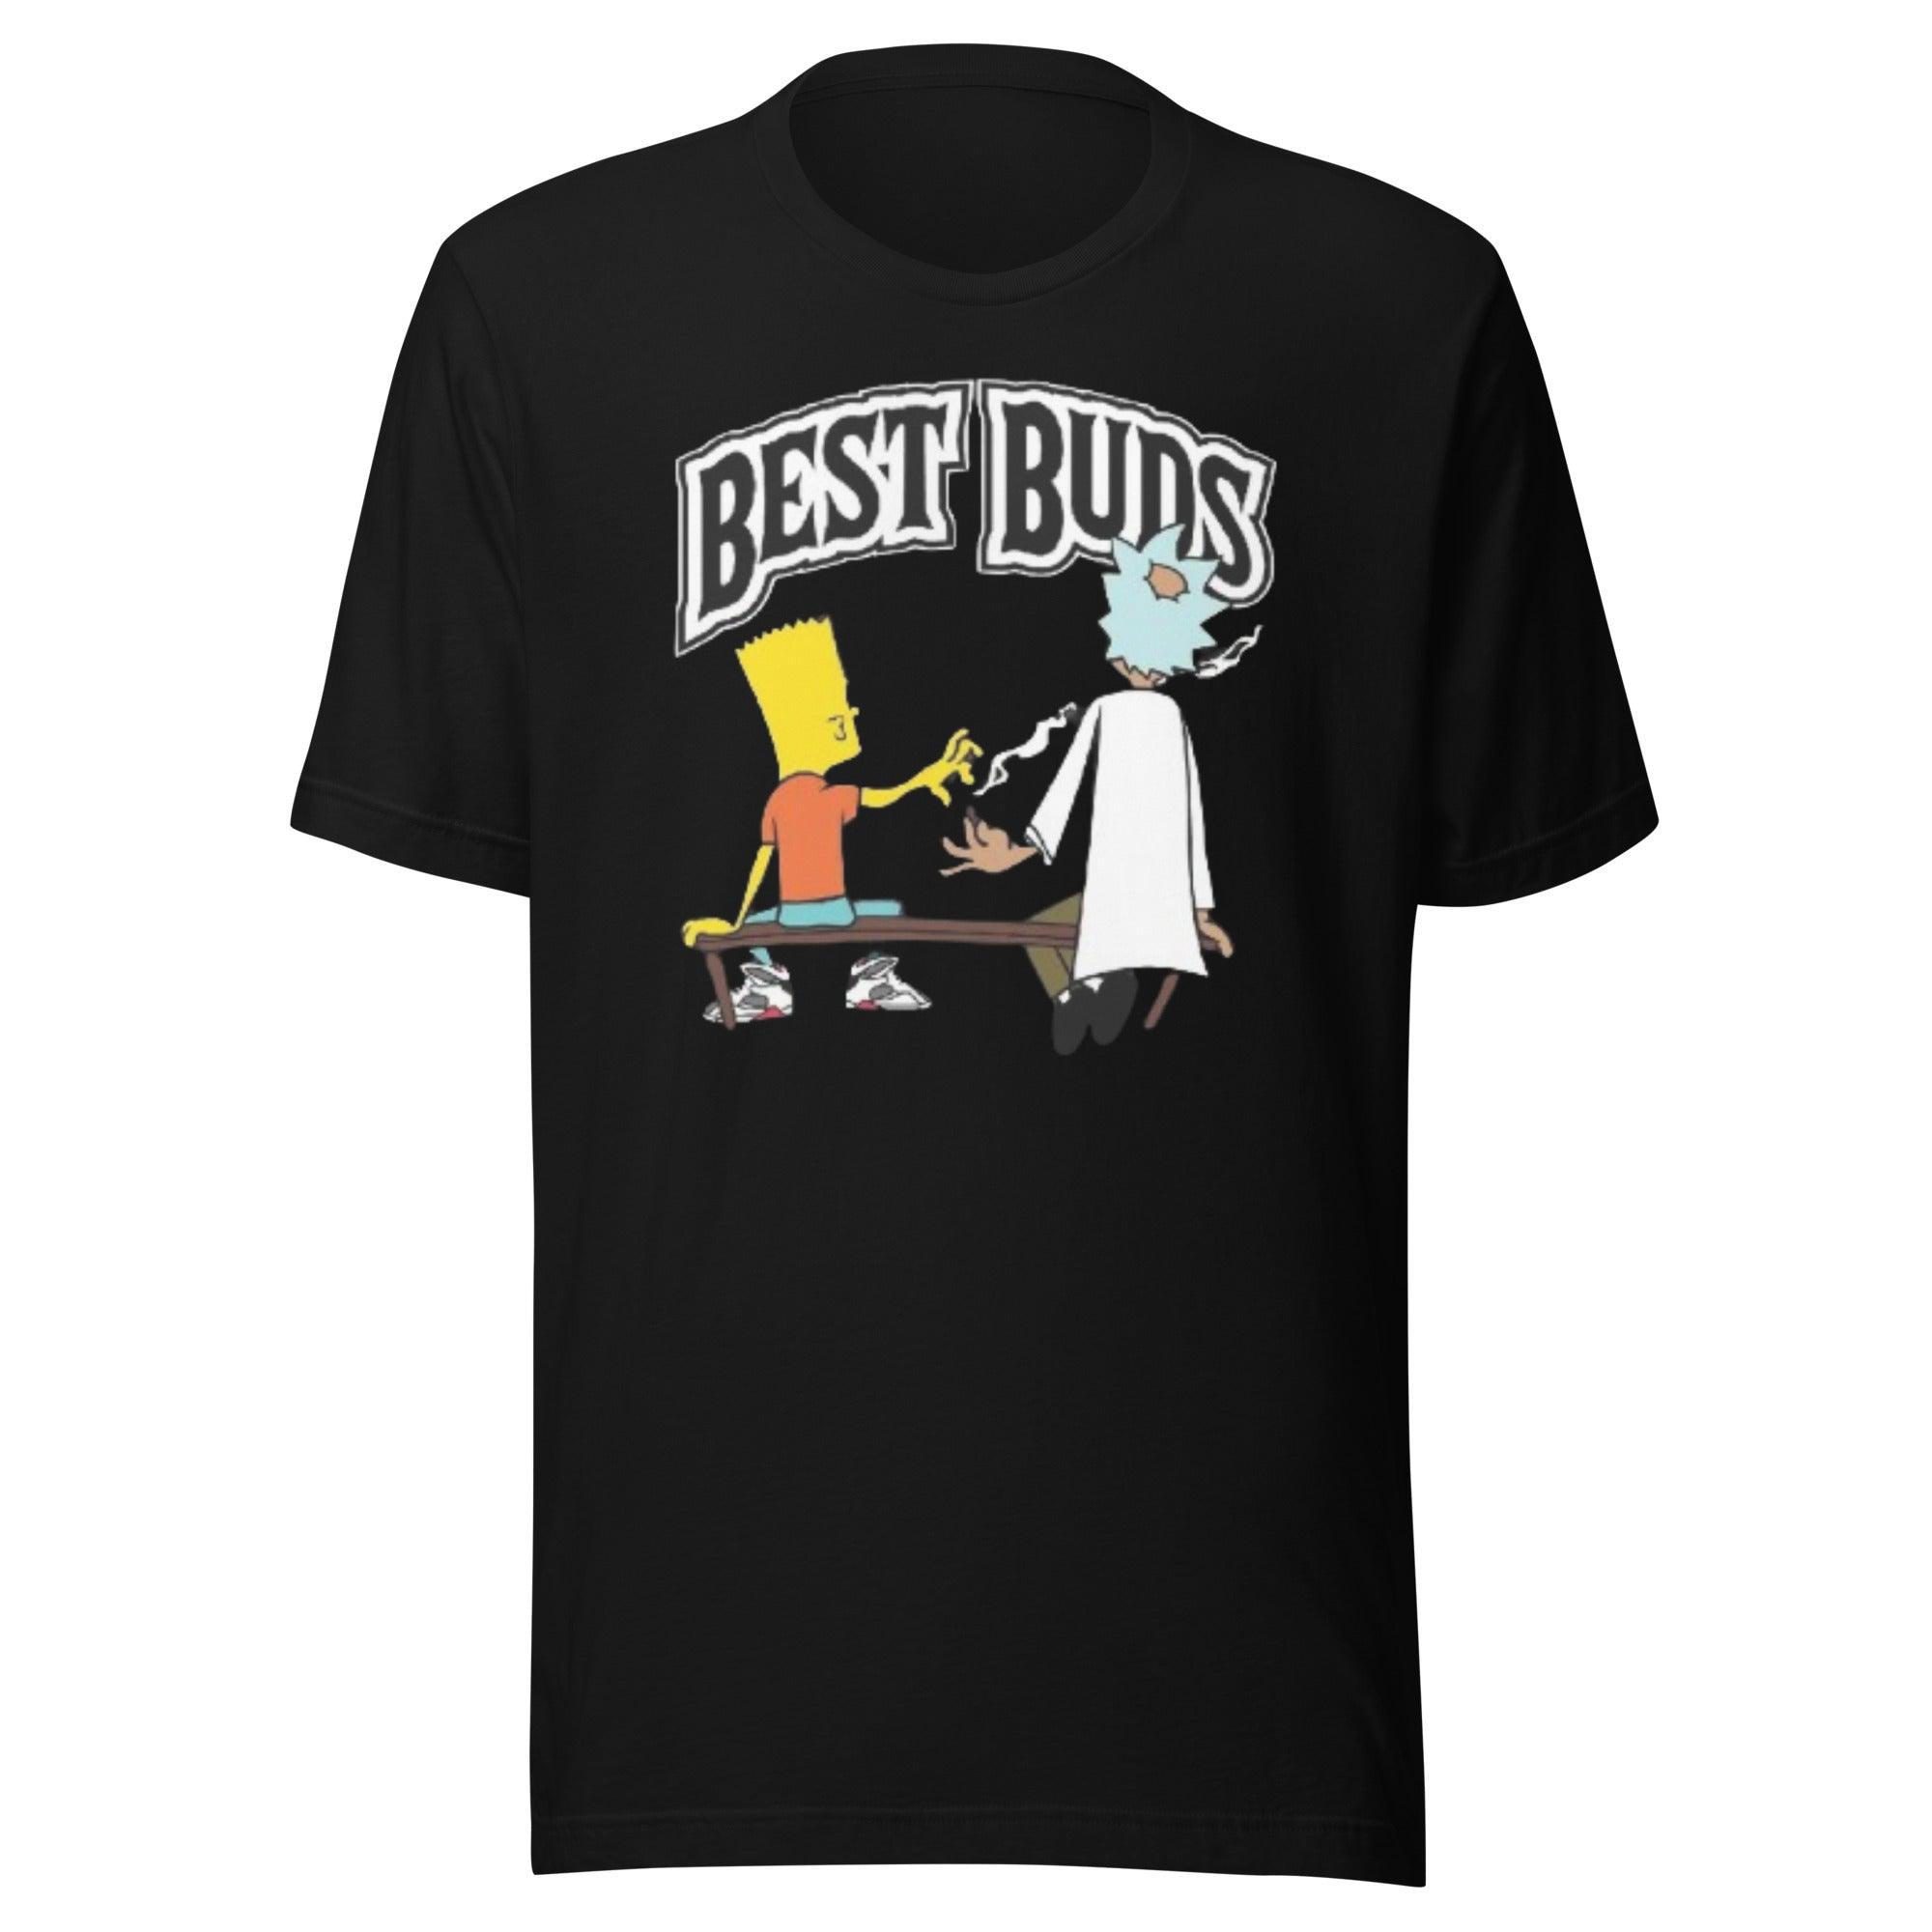 Weed T-shirt Famous Animated TV Characters Best Buds Short Sleeve Cotton Unisex Crewneck Top - TopKoalaTee